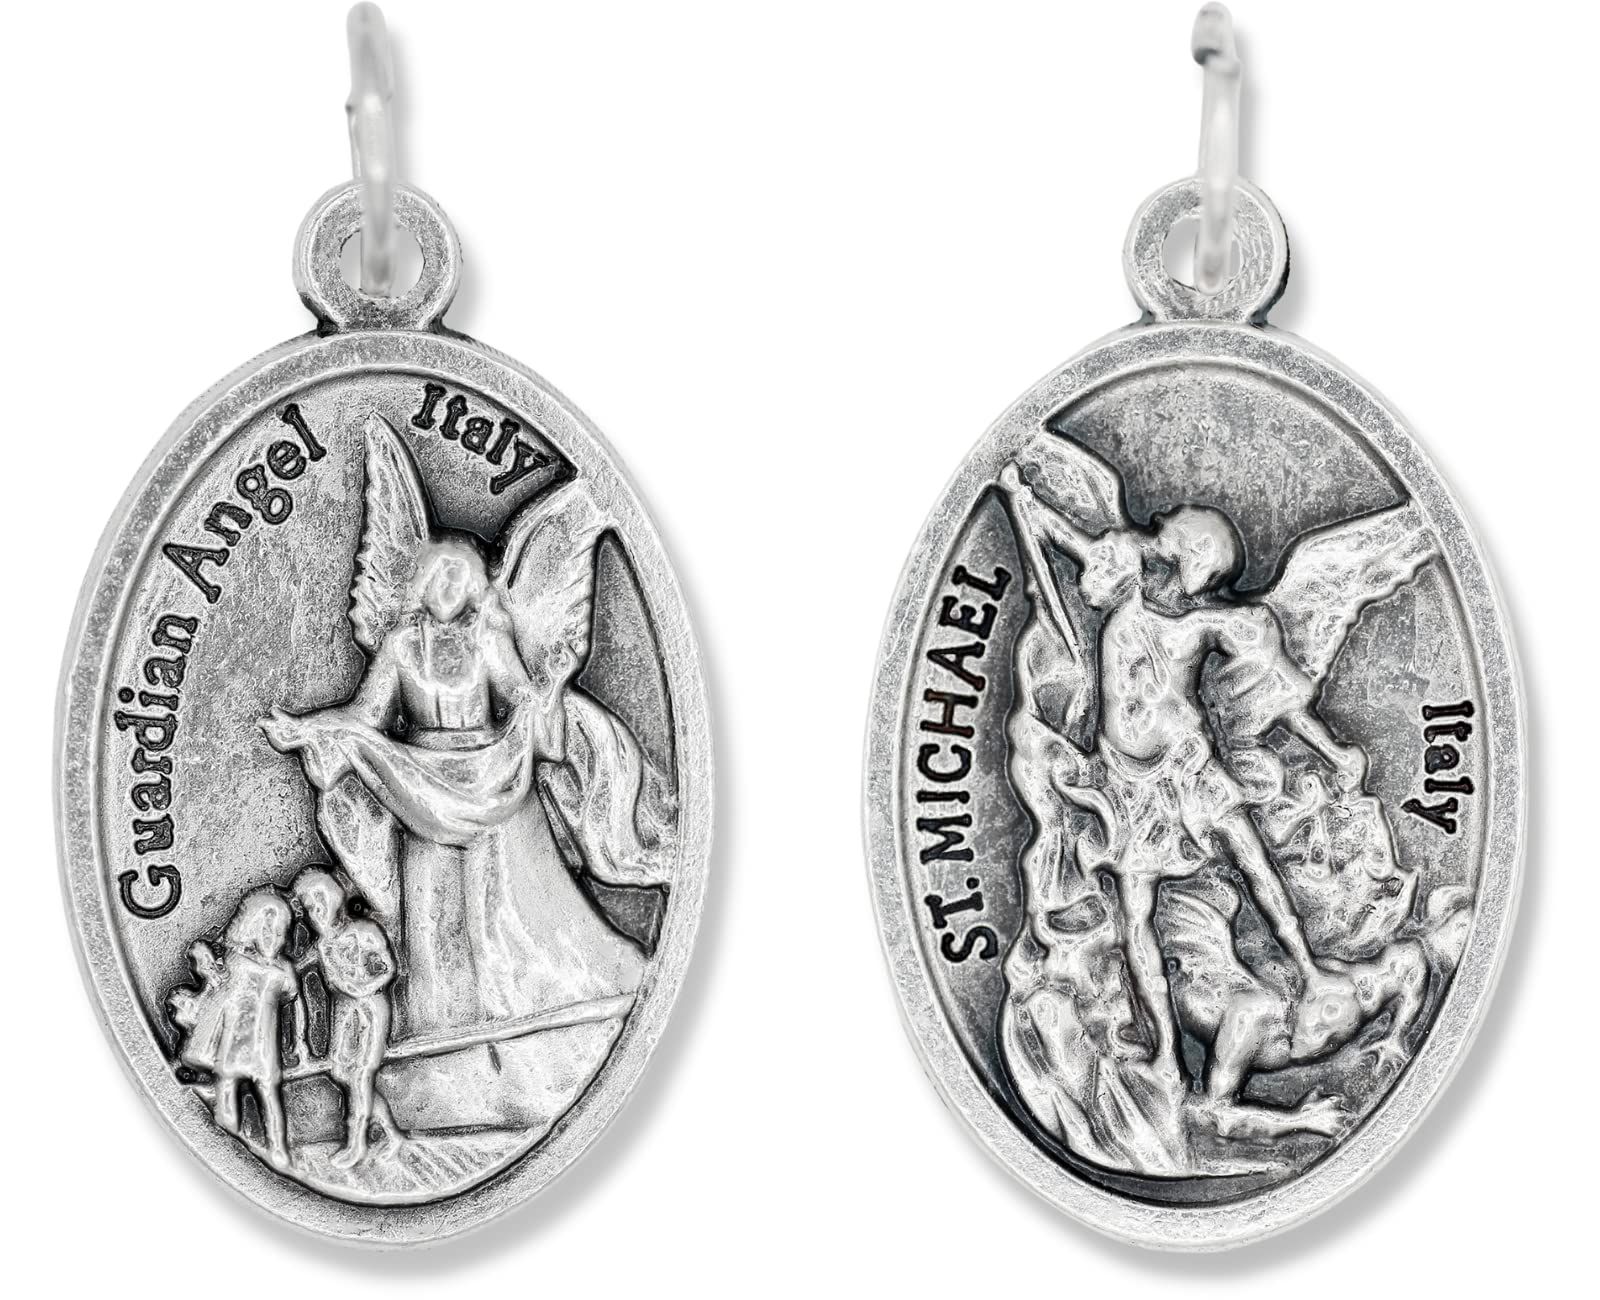 Bulk Pack of 5 - Guardian Angel and St. Michael the Archangel Medal - 1